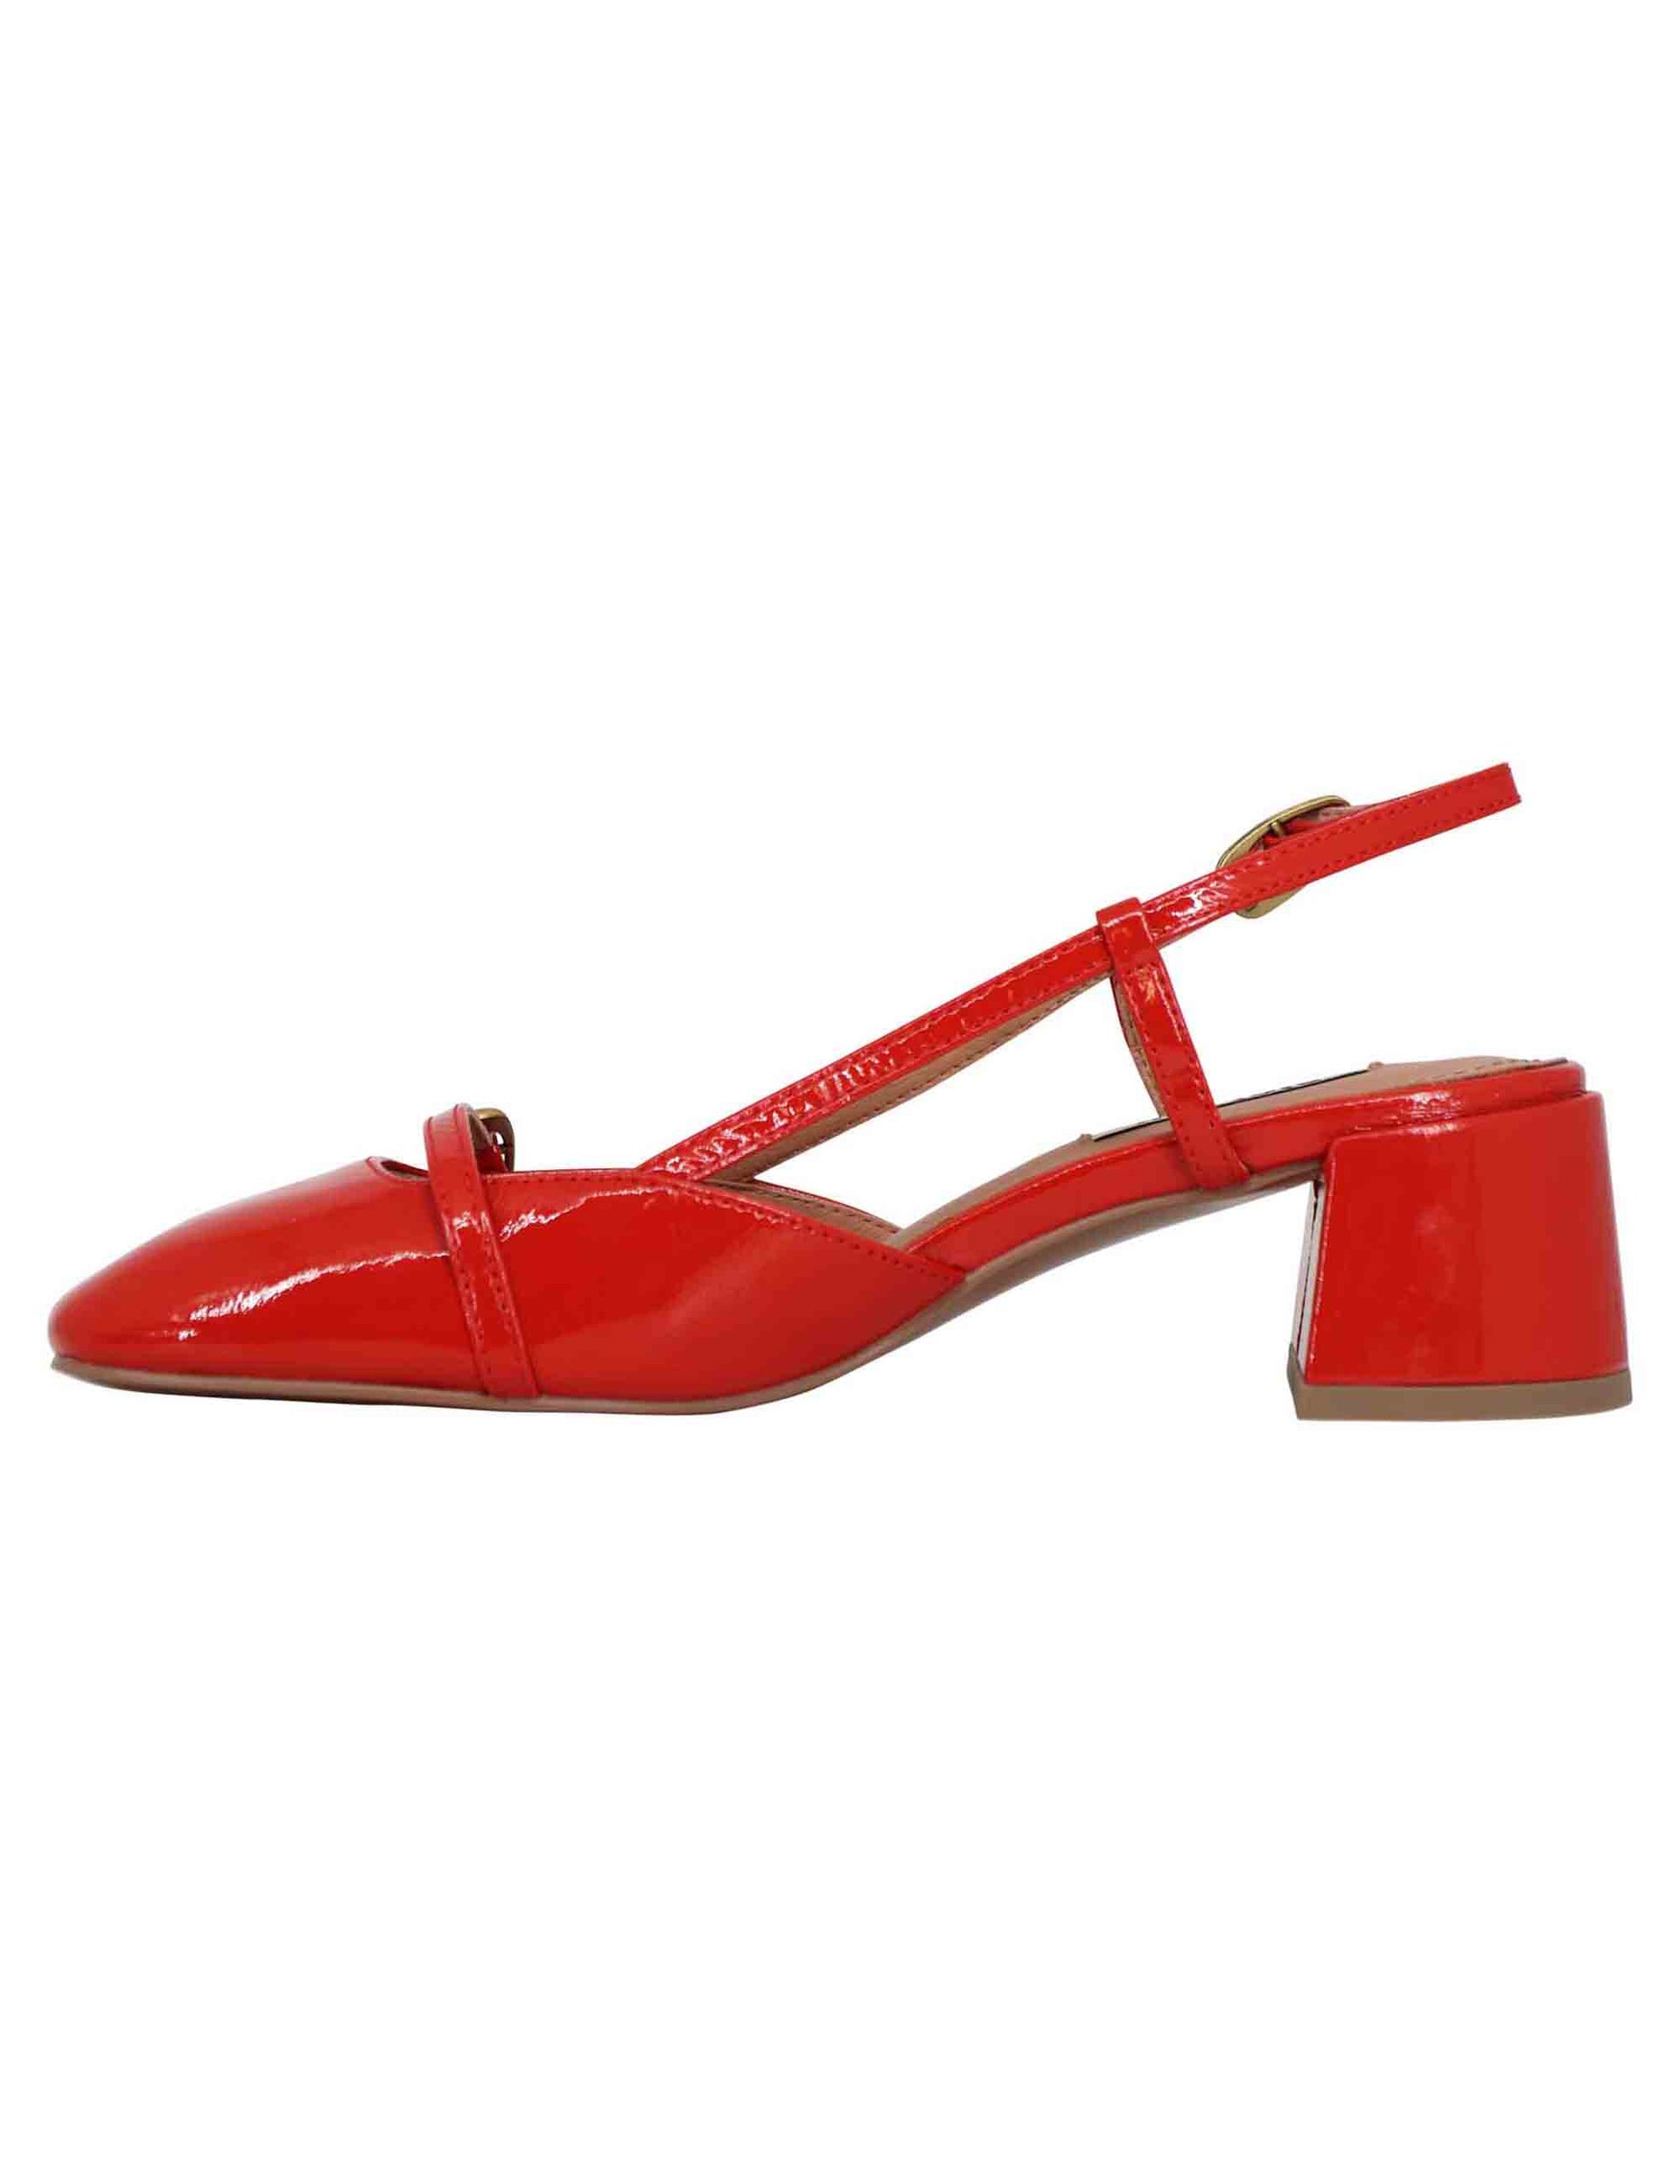 Women's slingback pumps in red patent leather with Patty buckle